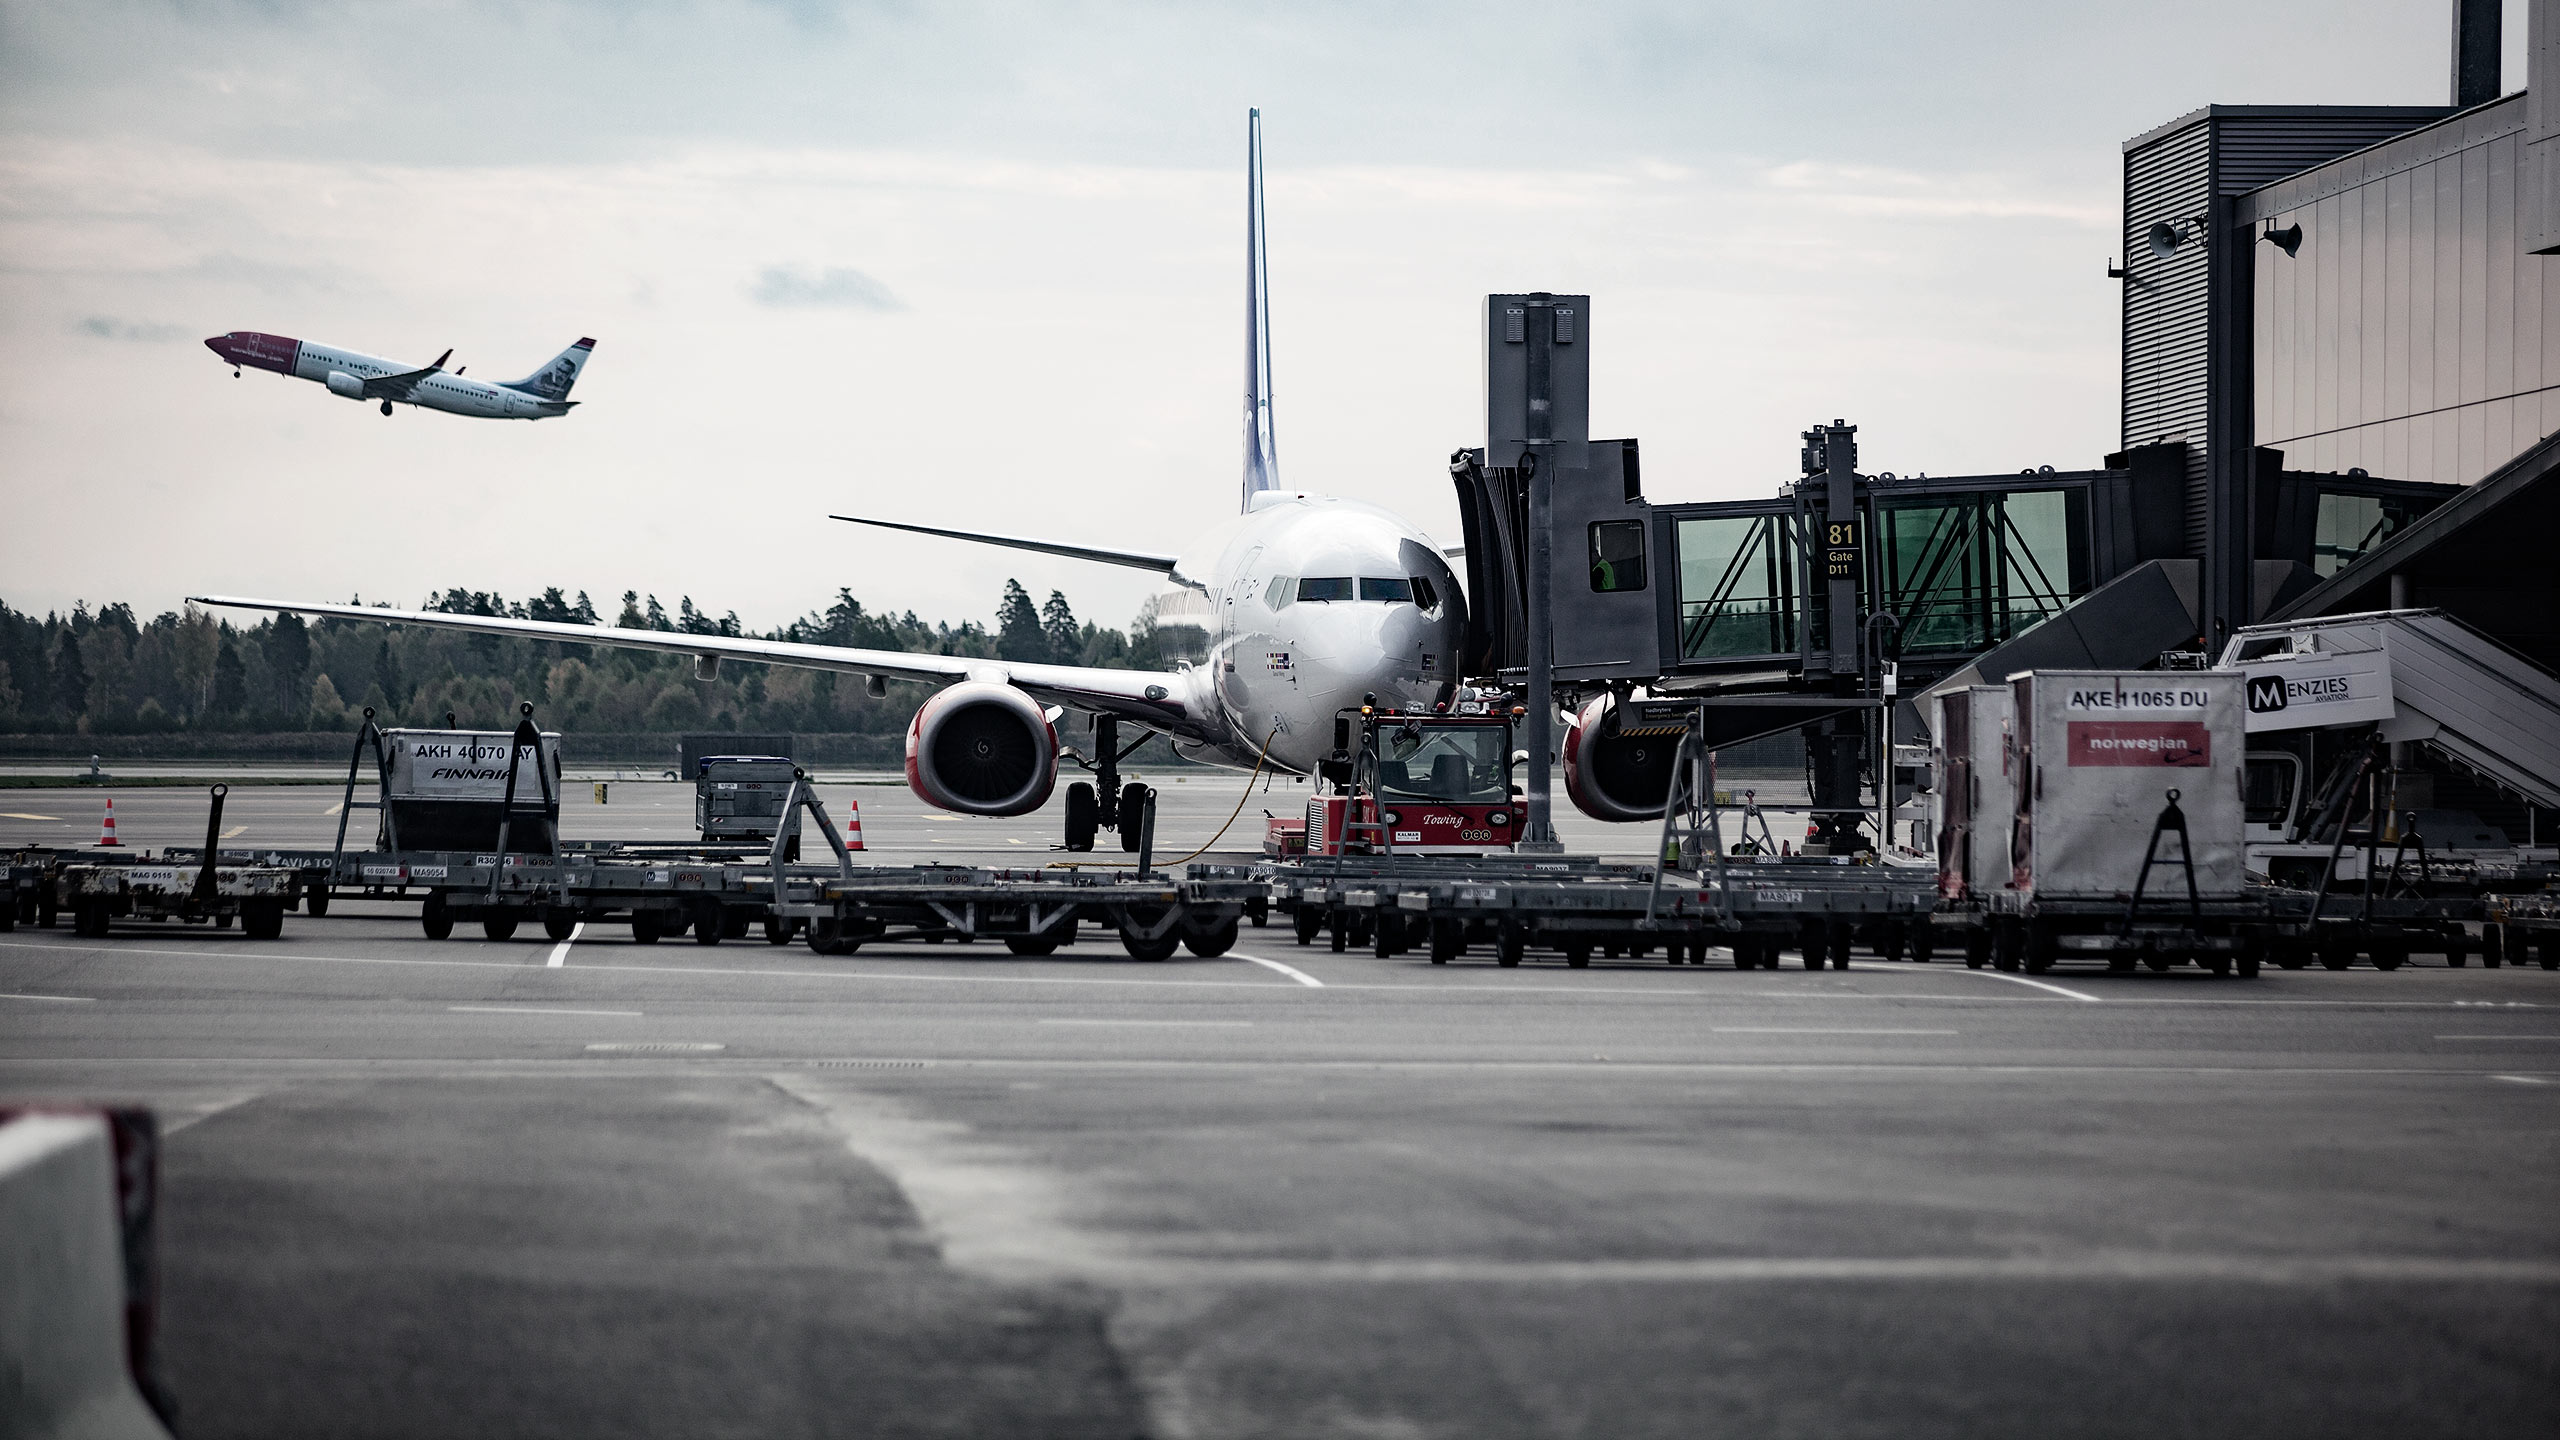 A cargo plane is loaded at a Norwegian airport